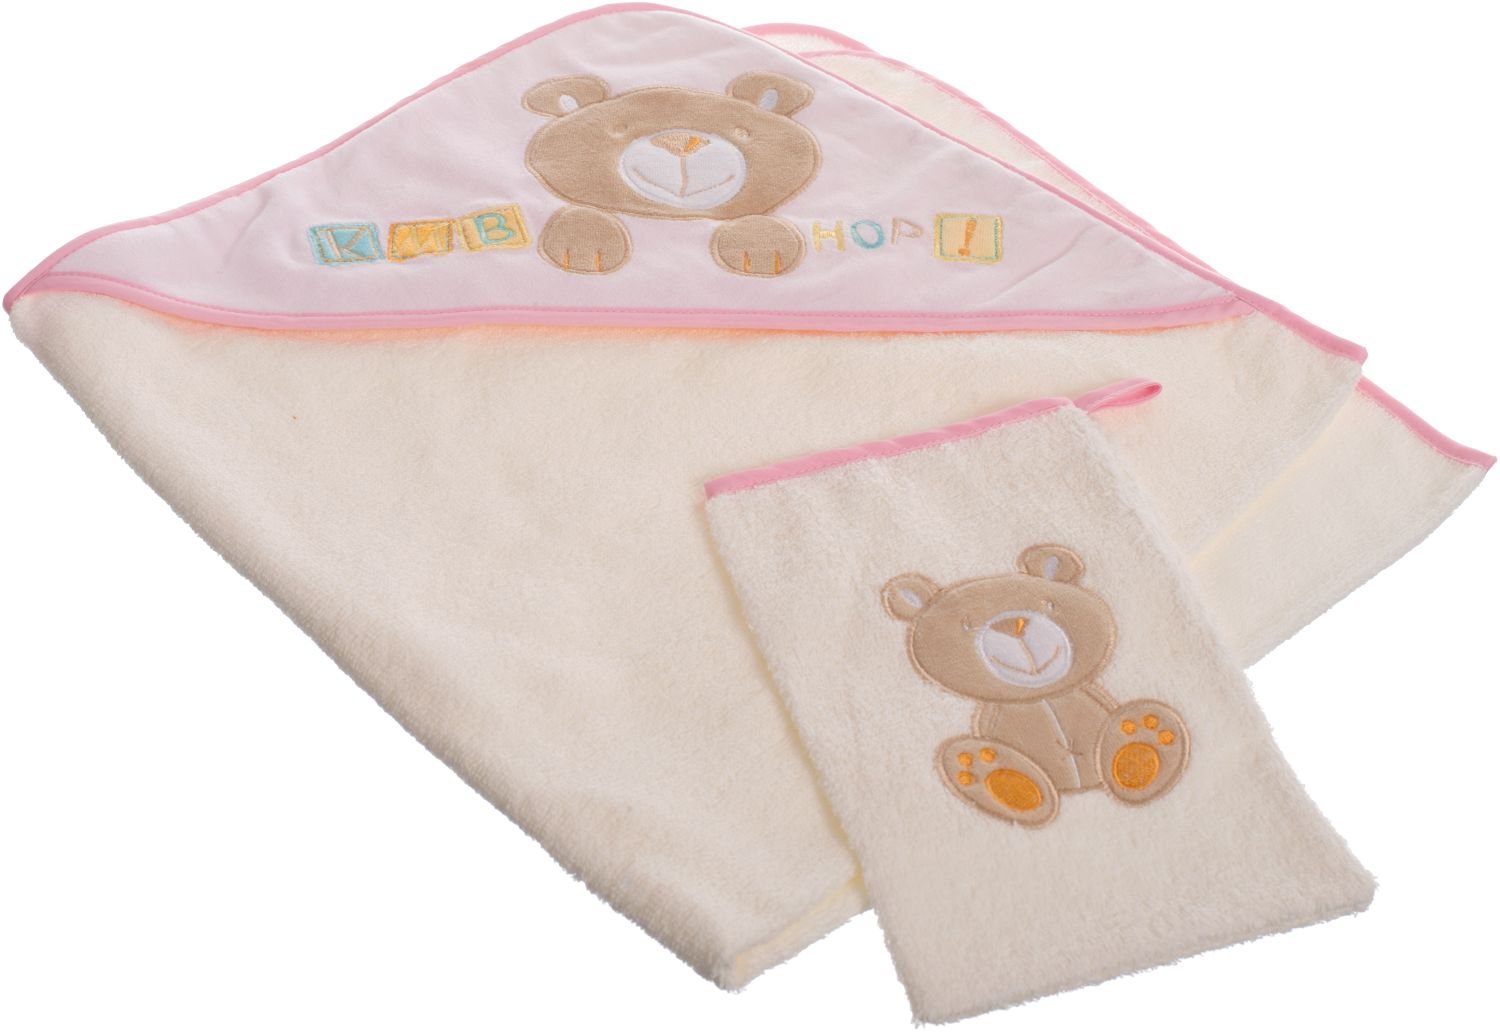 Bieco 38000120 Baby Hooded Bath Towel and Wash Mitt Set – Pink, Approx. 100 x 100 cm